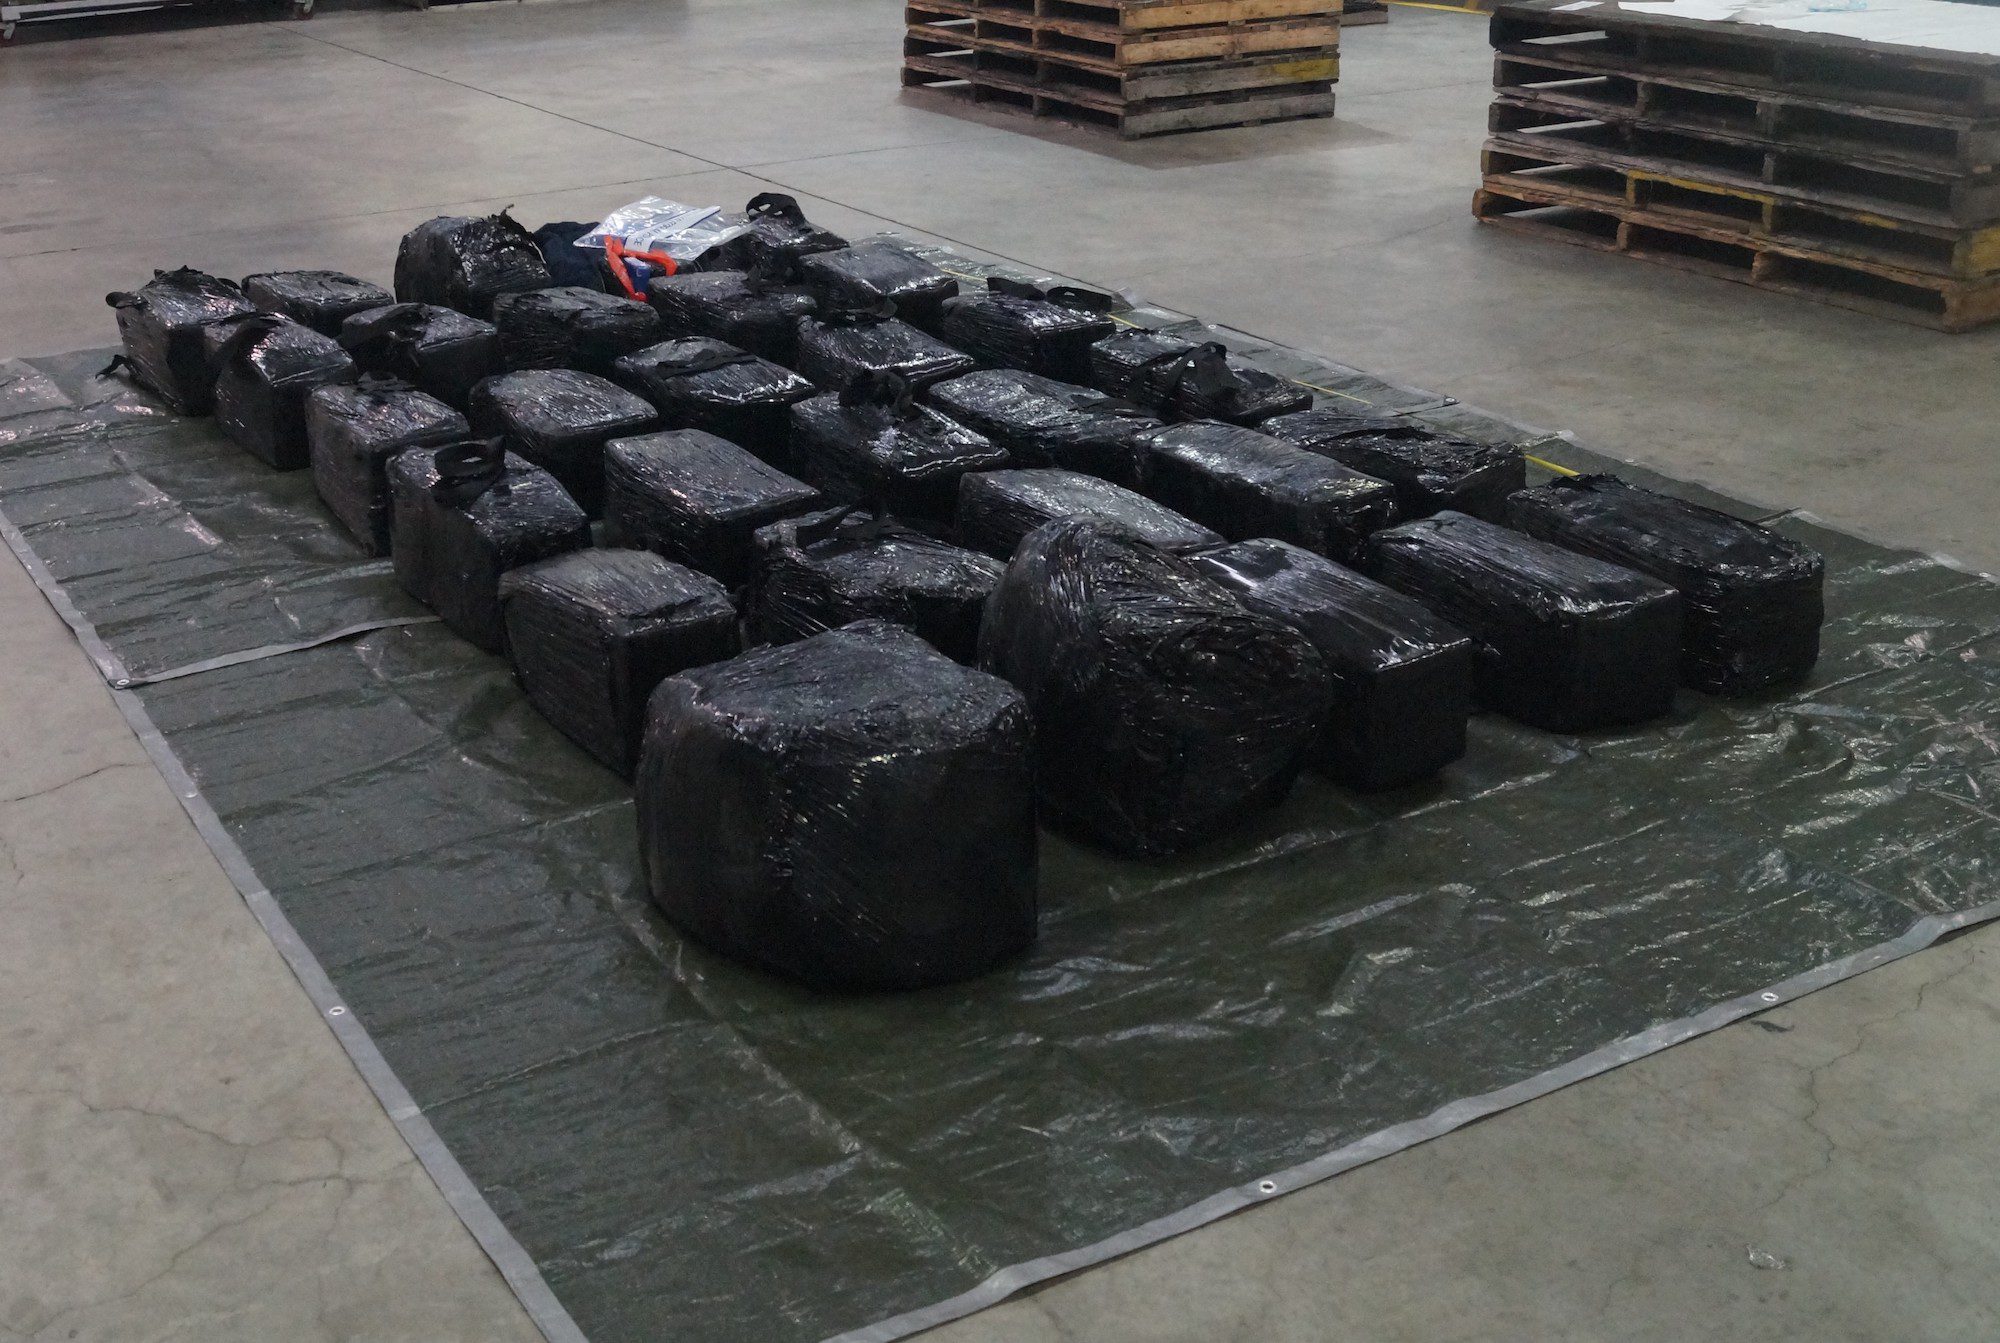 International Drug Bust Nets $677 Mln Of Cocaine Off The Coast Of South America